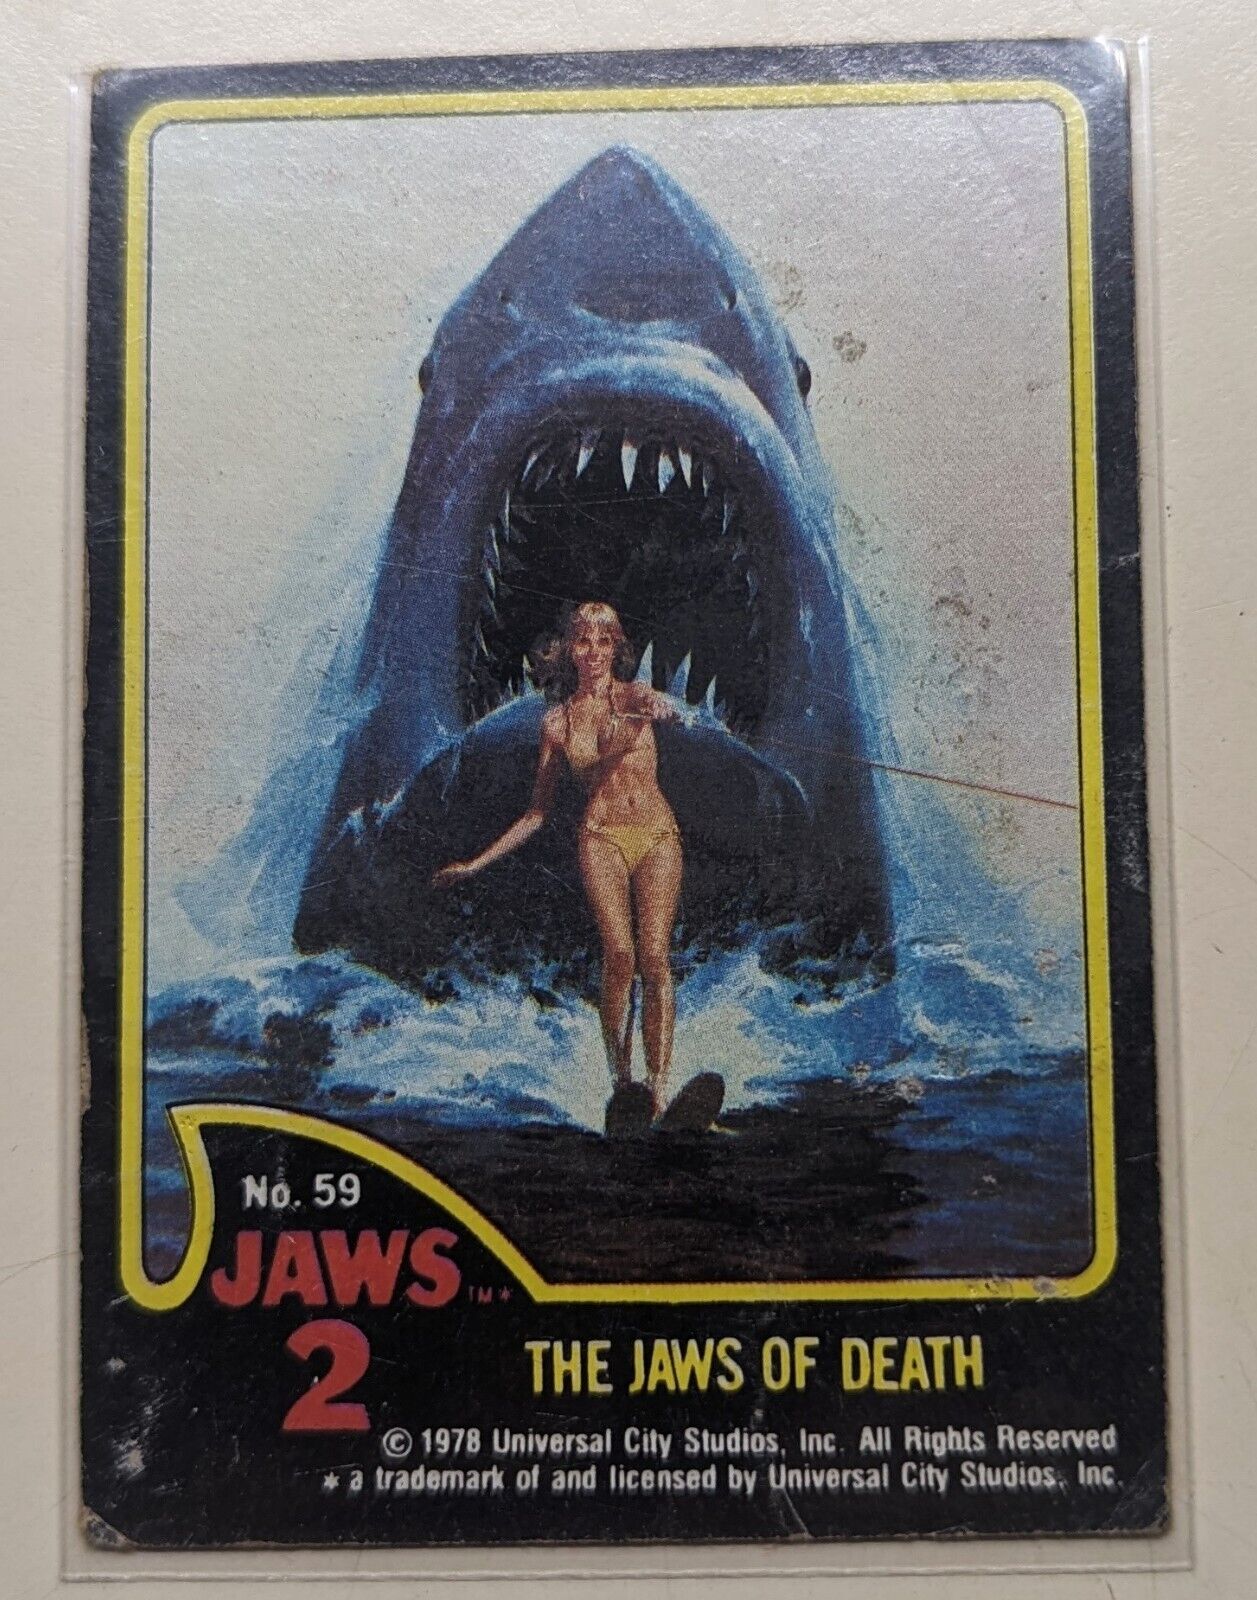 1978 Jaws 2 trading card Movie Facts #11 Good condition